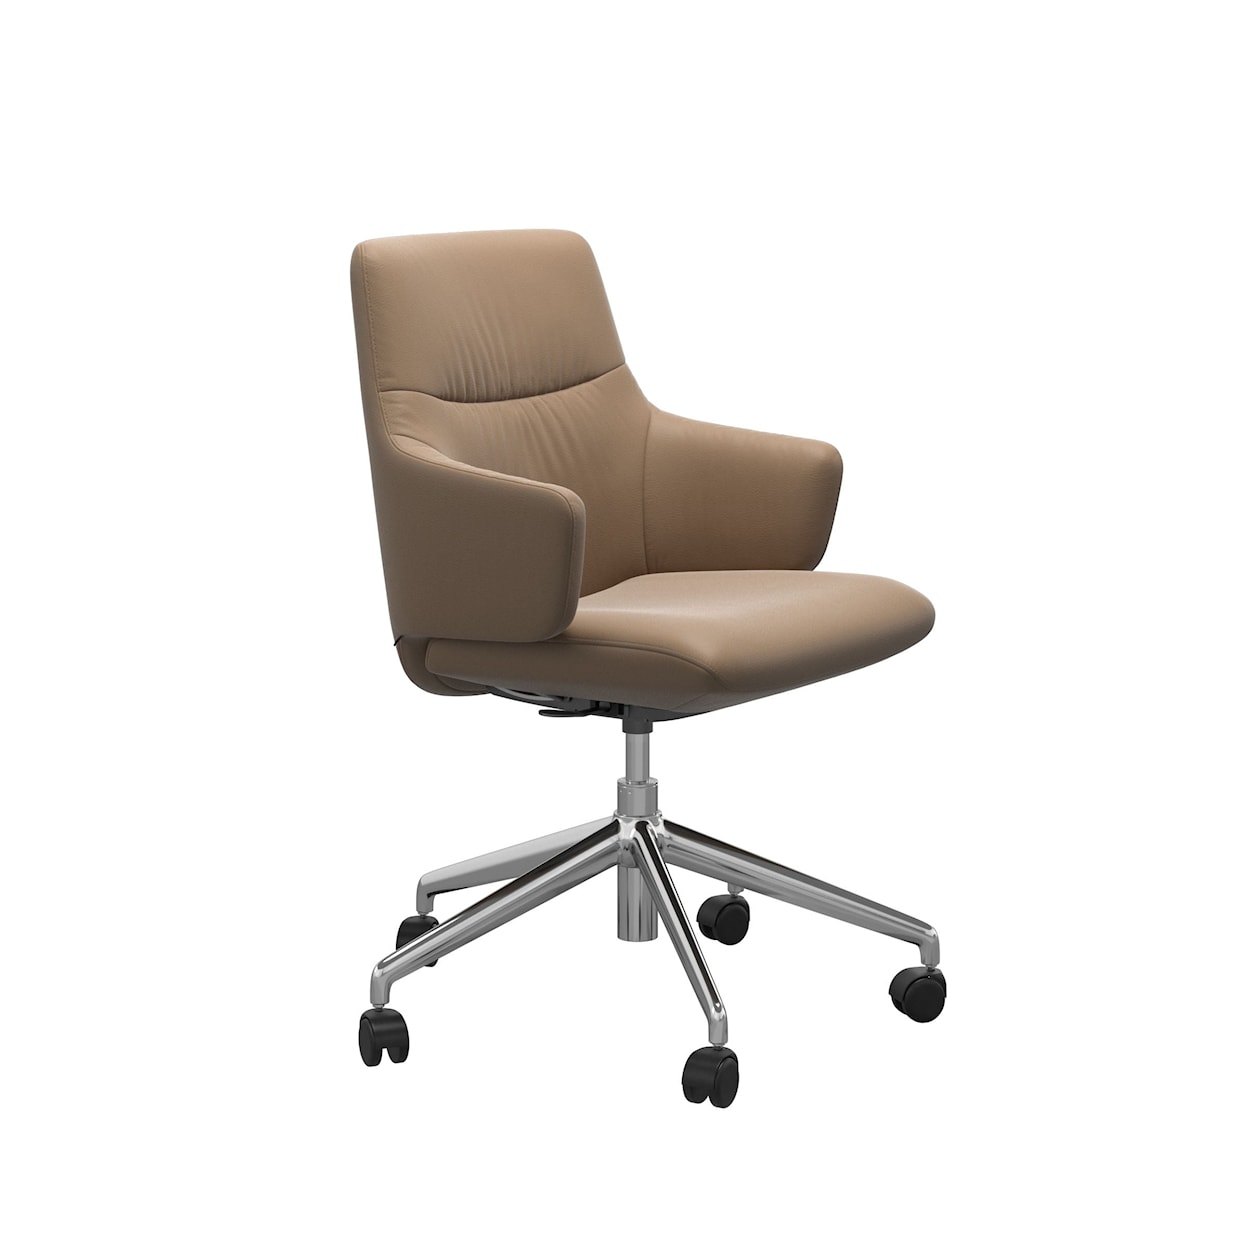 Stressless by Ekornes Stressless Mint Mint Large Low-Back Office Chair w Arms